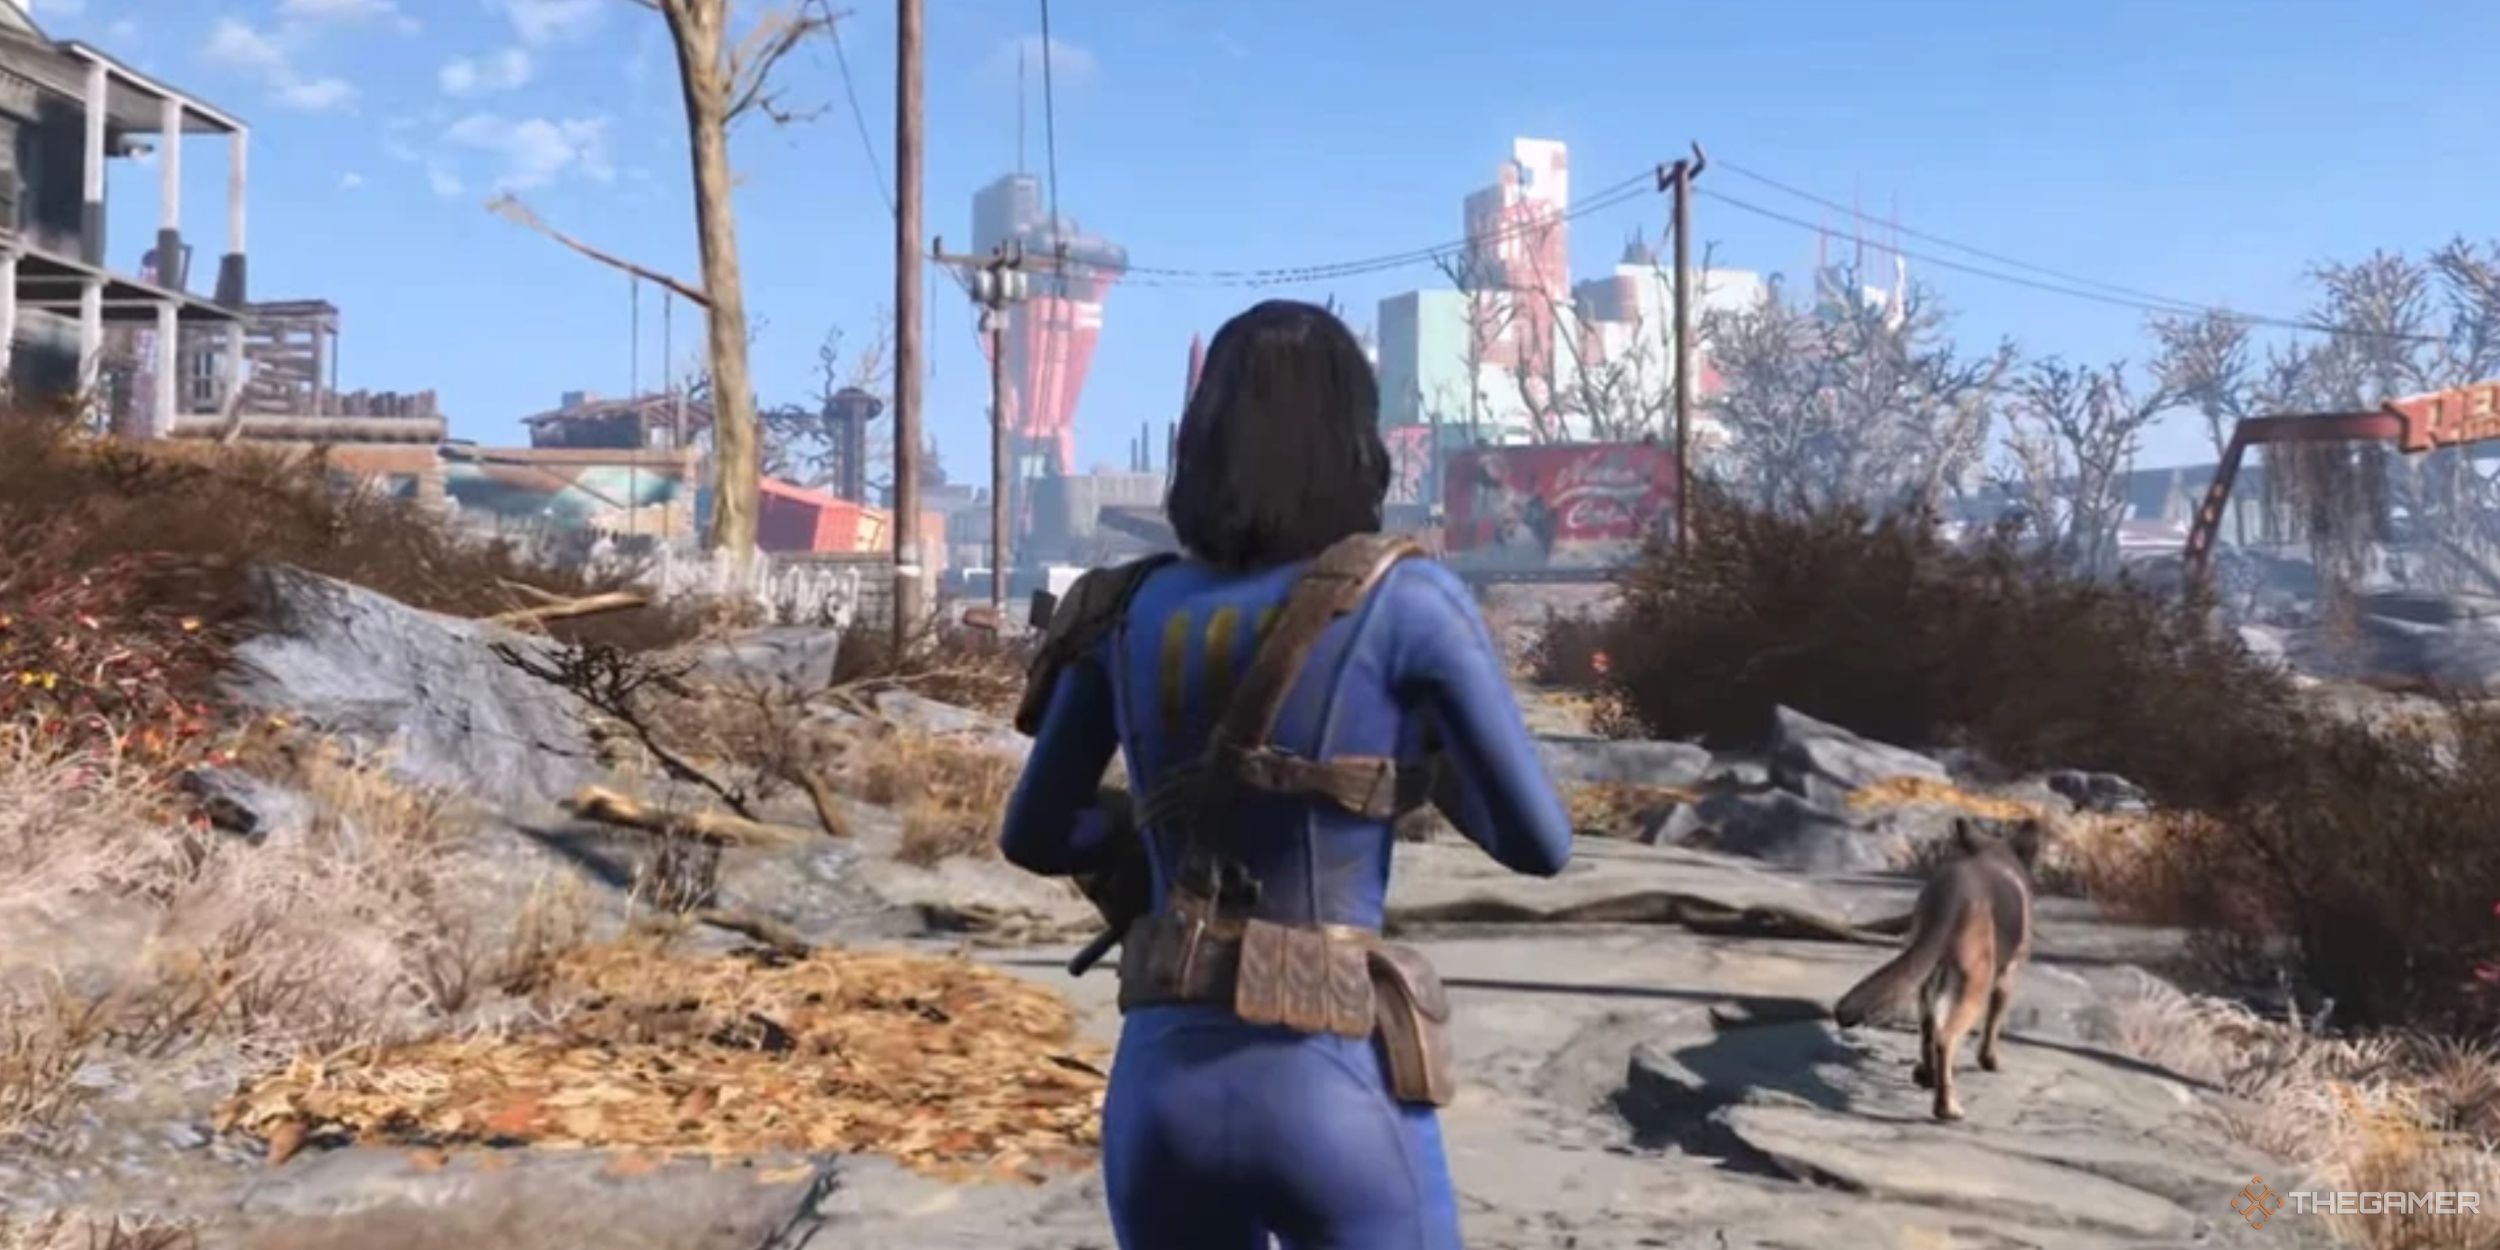 The female Sole Survivor from Fallout 4 heads down a broken road with her canine companion, Dogmeat. She's wearing a blue Vault 111 jumpsuit and armed with a rifle.